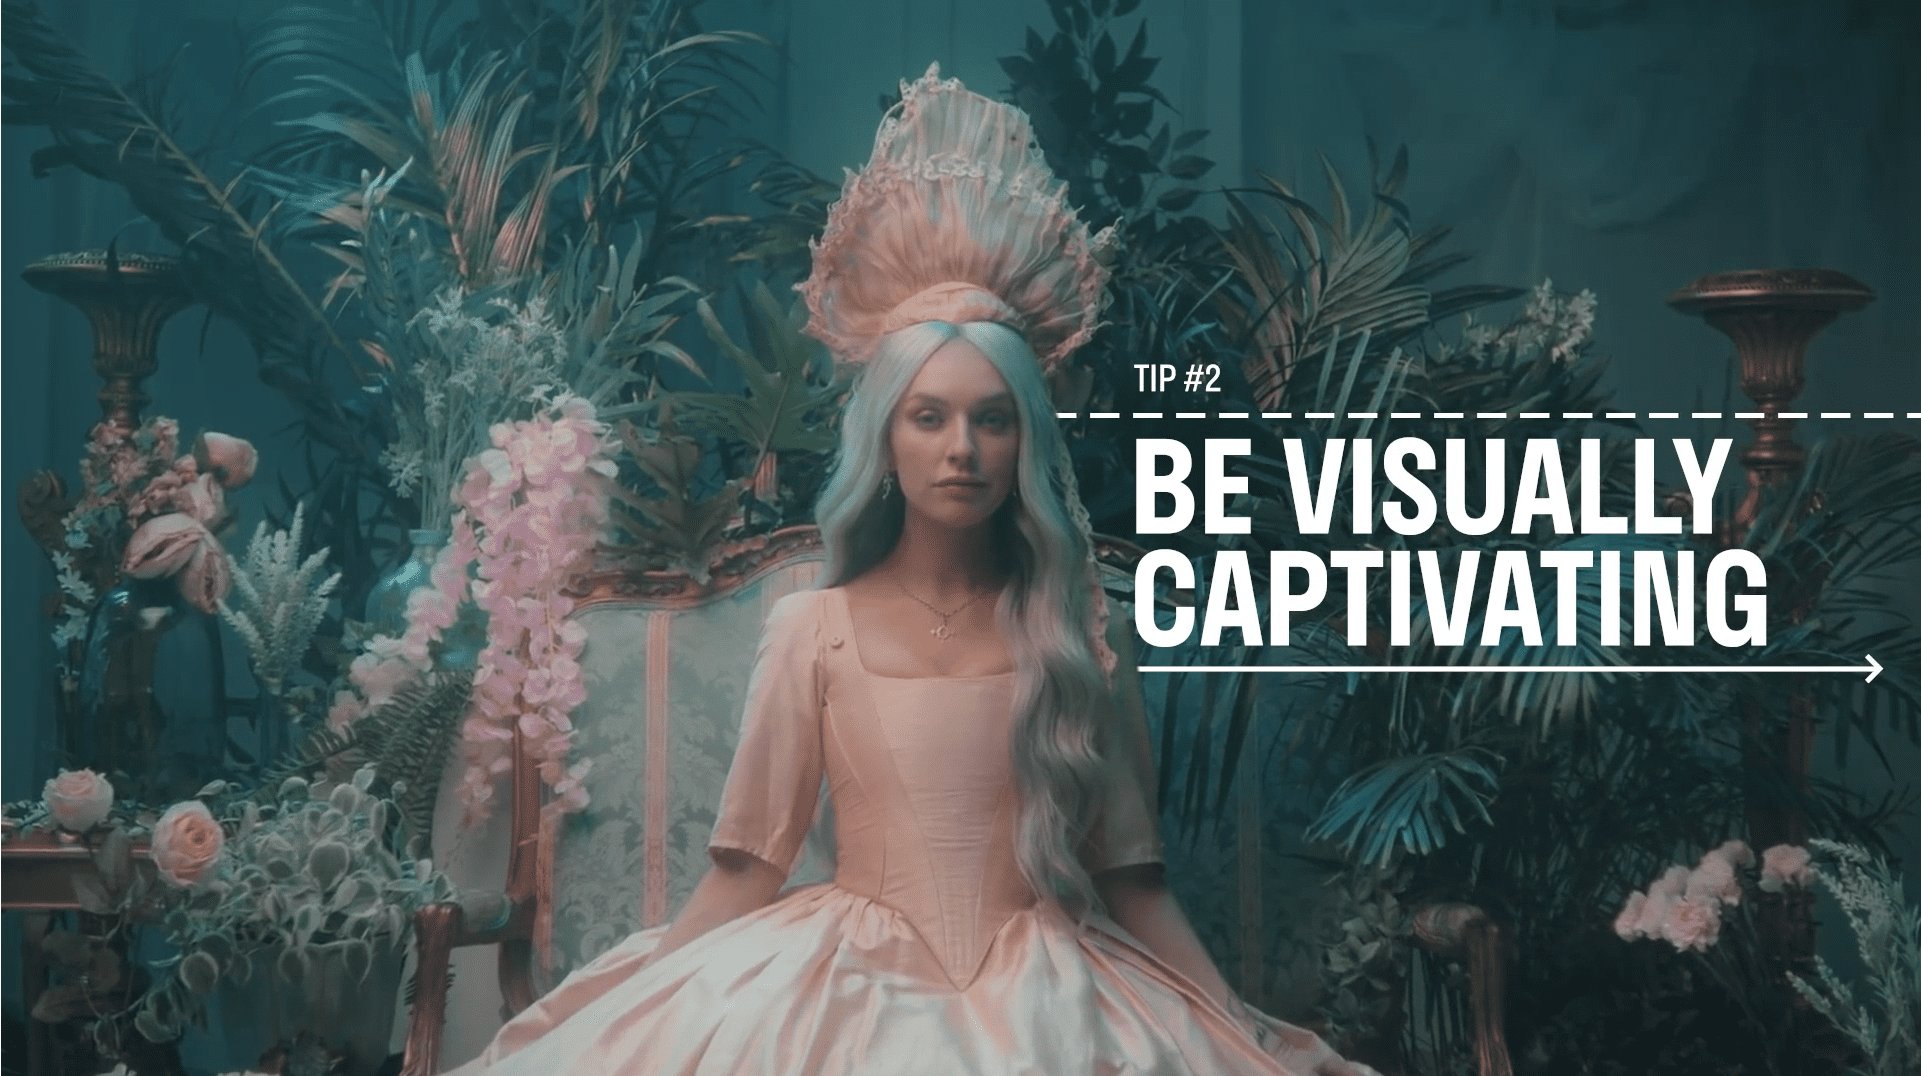 Image of Zolita from one of her music videos with white text that reads Tip #2 - Be visually captivating to create videos that engage audiences.